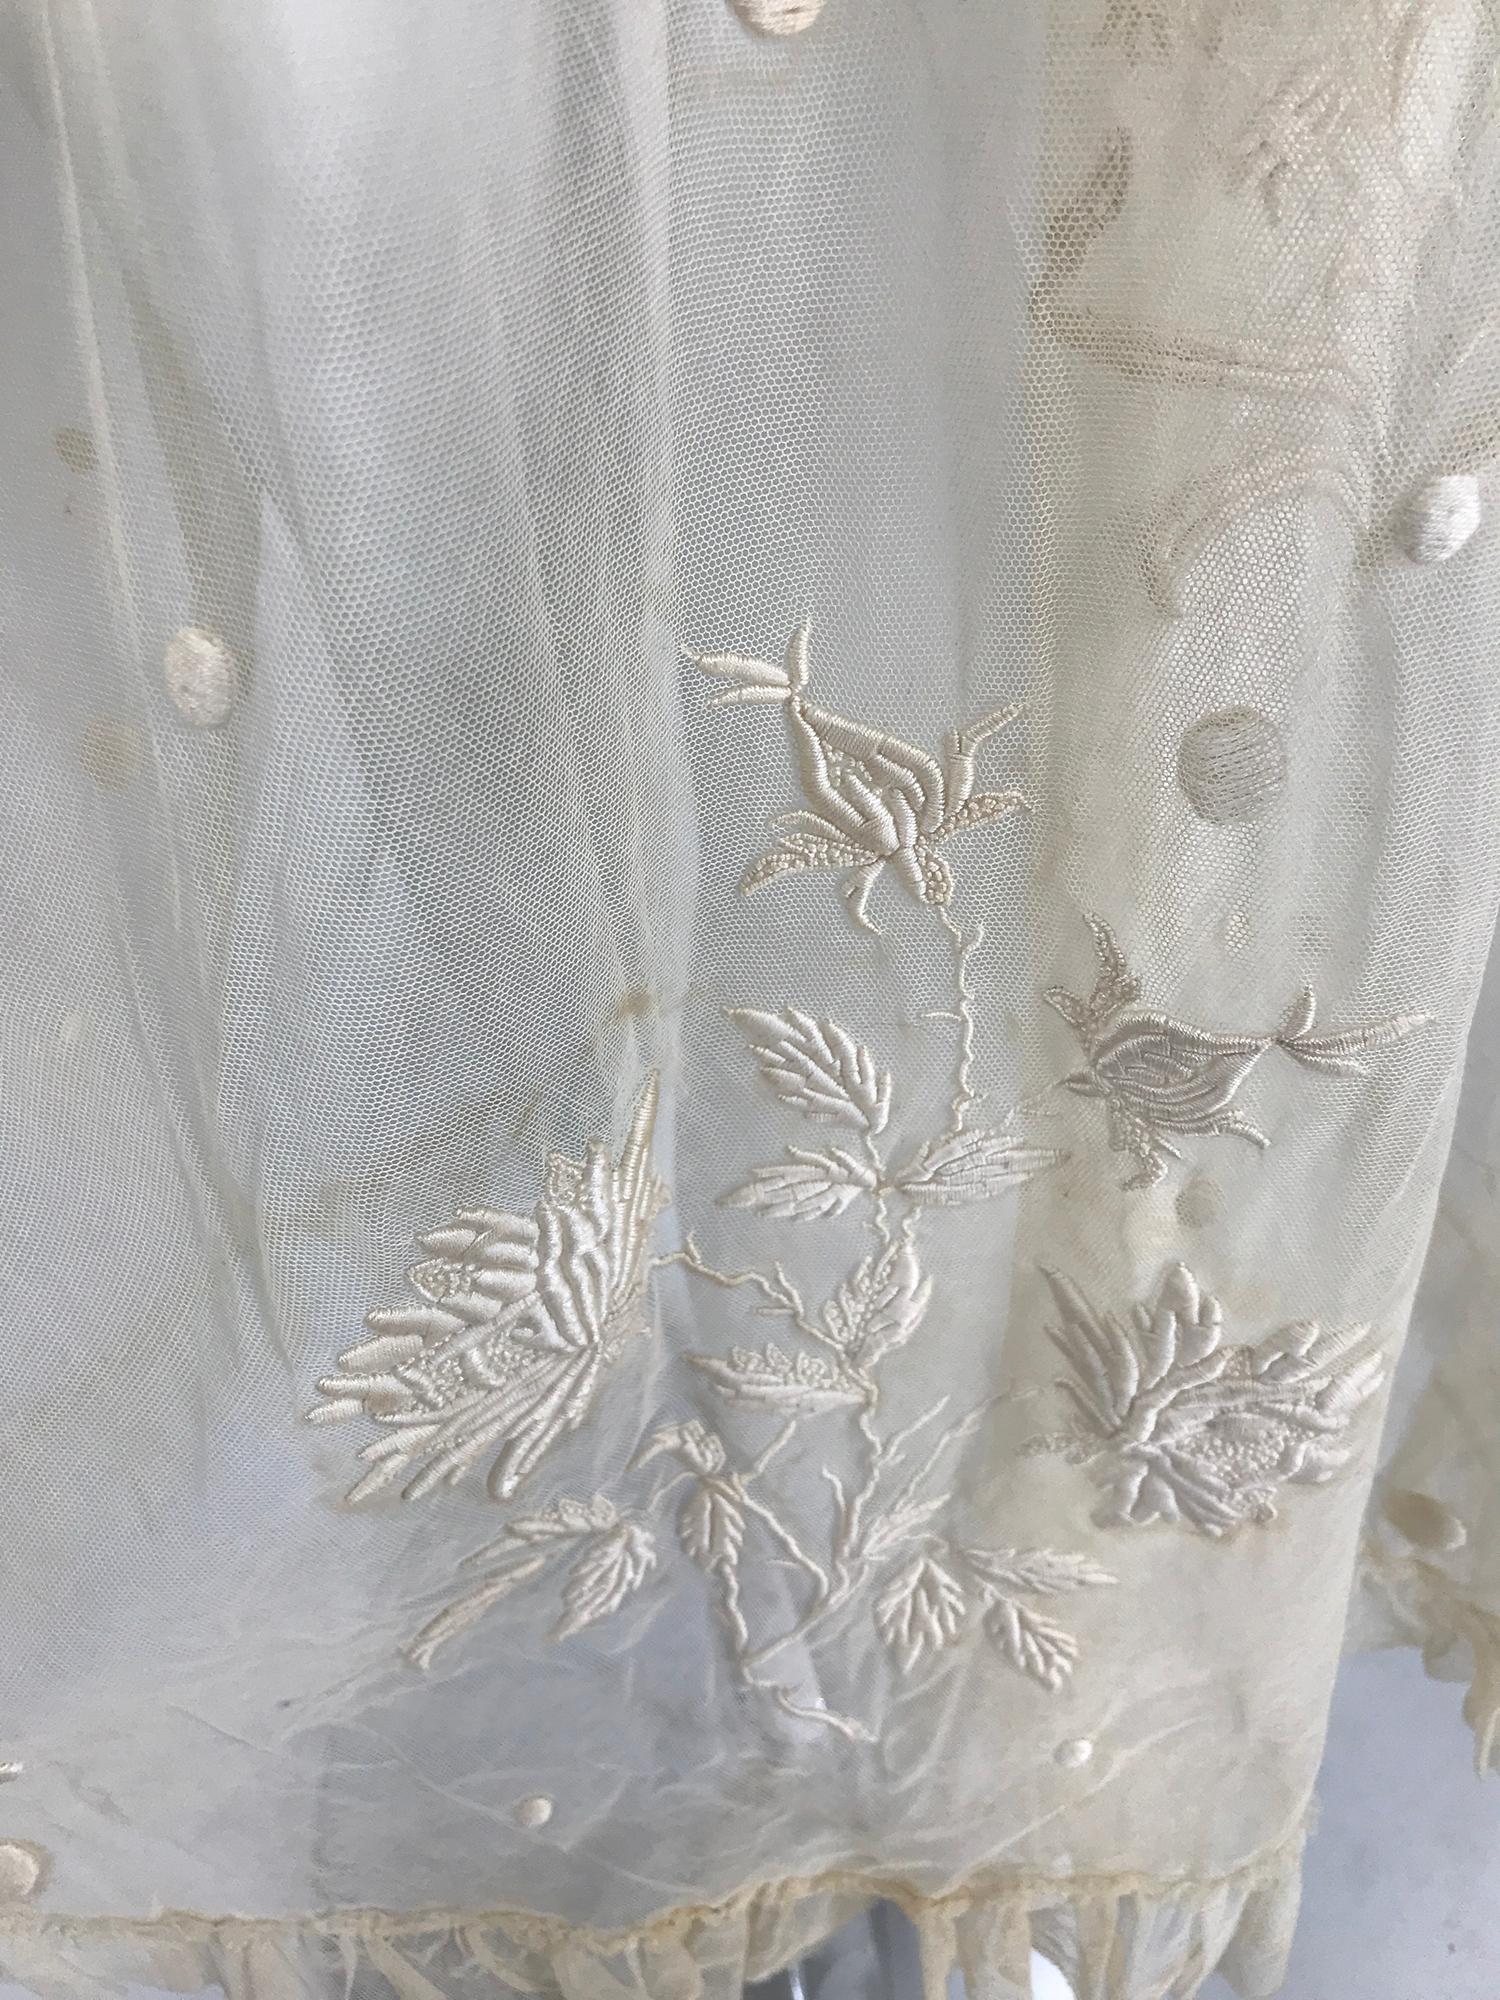 Edwardian Ecru Satin Stitch Embroidered Tulle Skirt 1900s For Sale 4